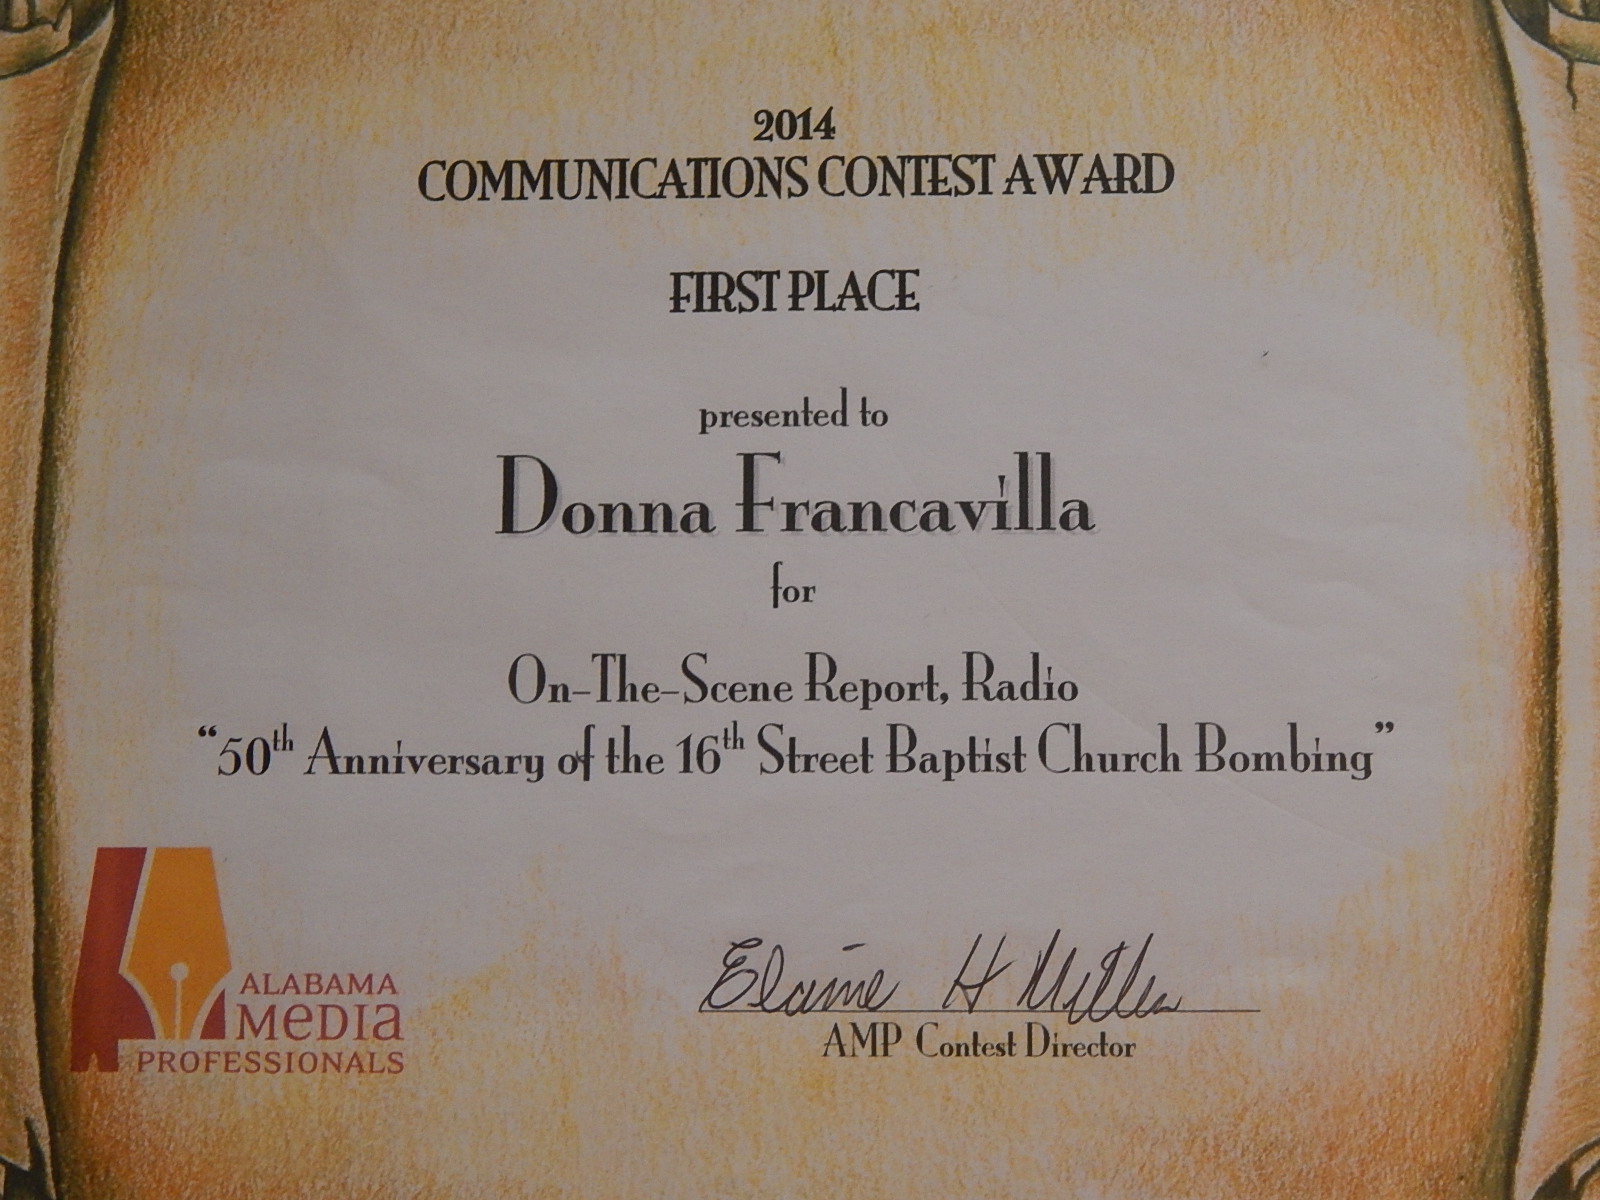 2014 Alabama Media Professionals Communications Contest Award - State Award - First Place presented to Donna Francavilla for On-The-Scene-Report - Radio "50th Anniversary of the 16th Street Church Bombing"